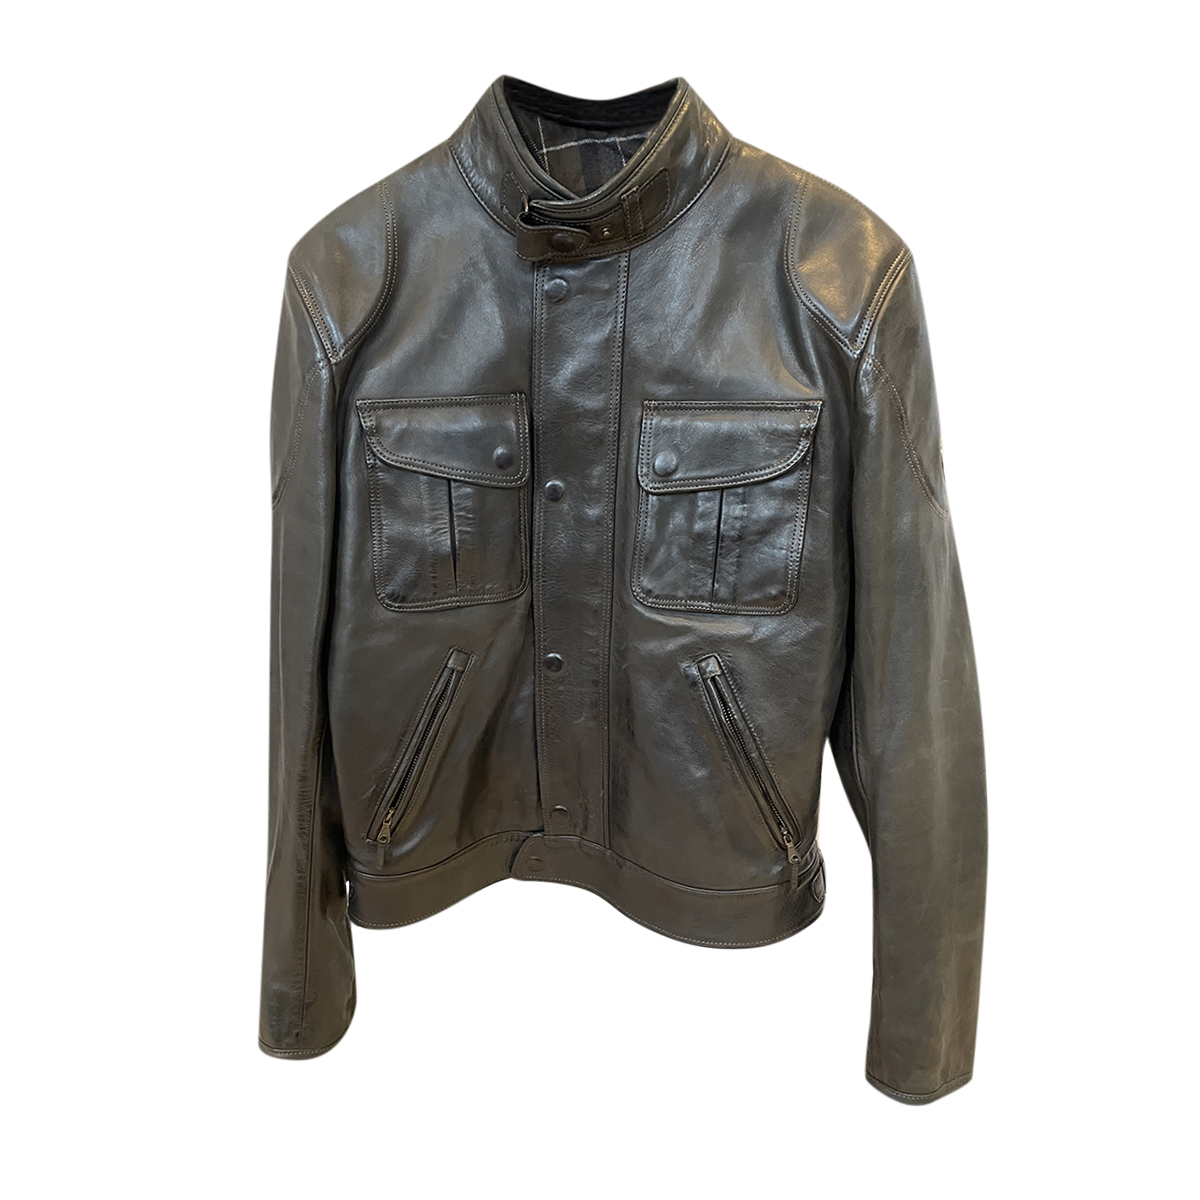 Matchless Dark Brown Leather Jacket with Liner